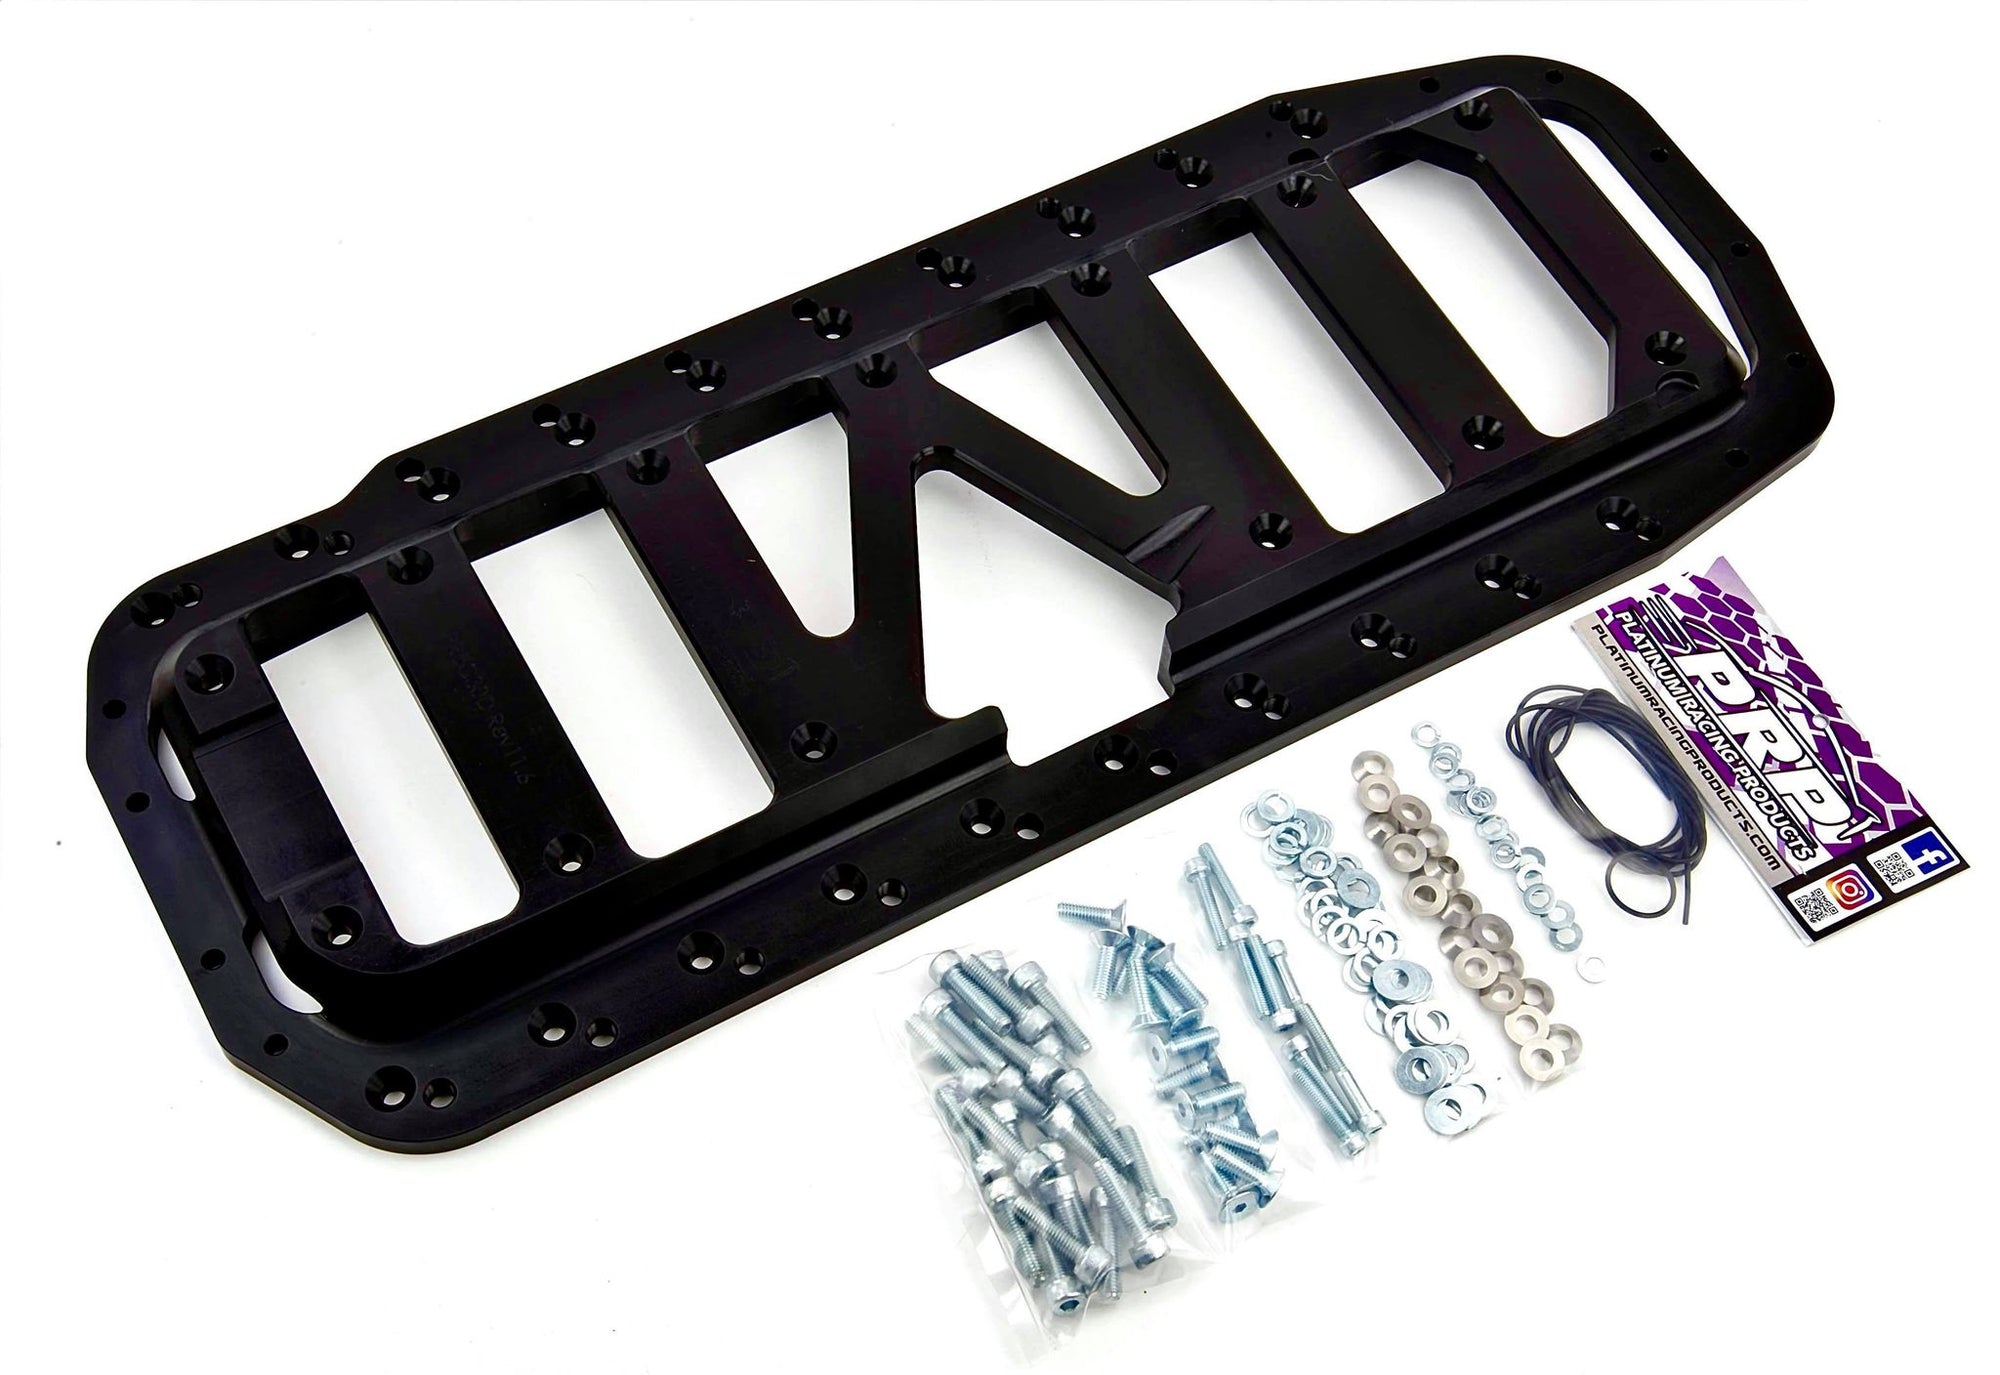 Platinum Racing Products - RD28 RB30 Dry Sump and RB25 Wet Sump Block Brace